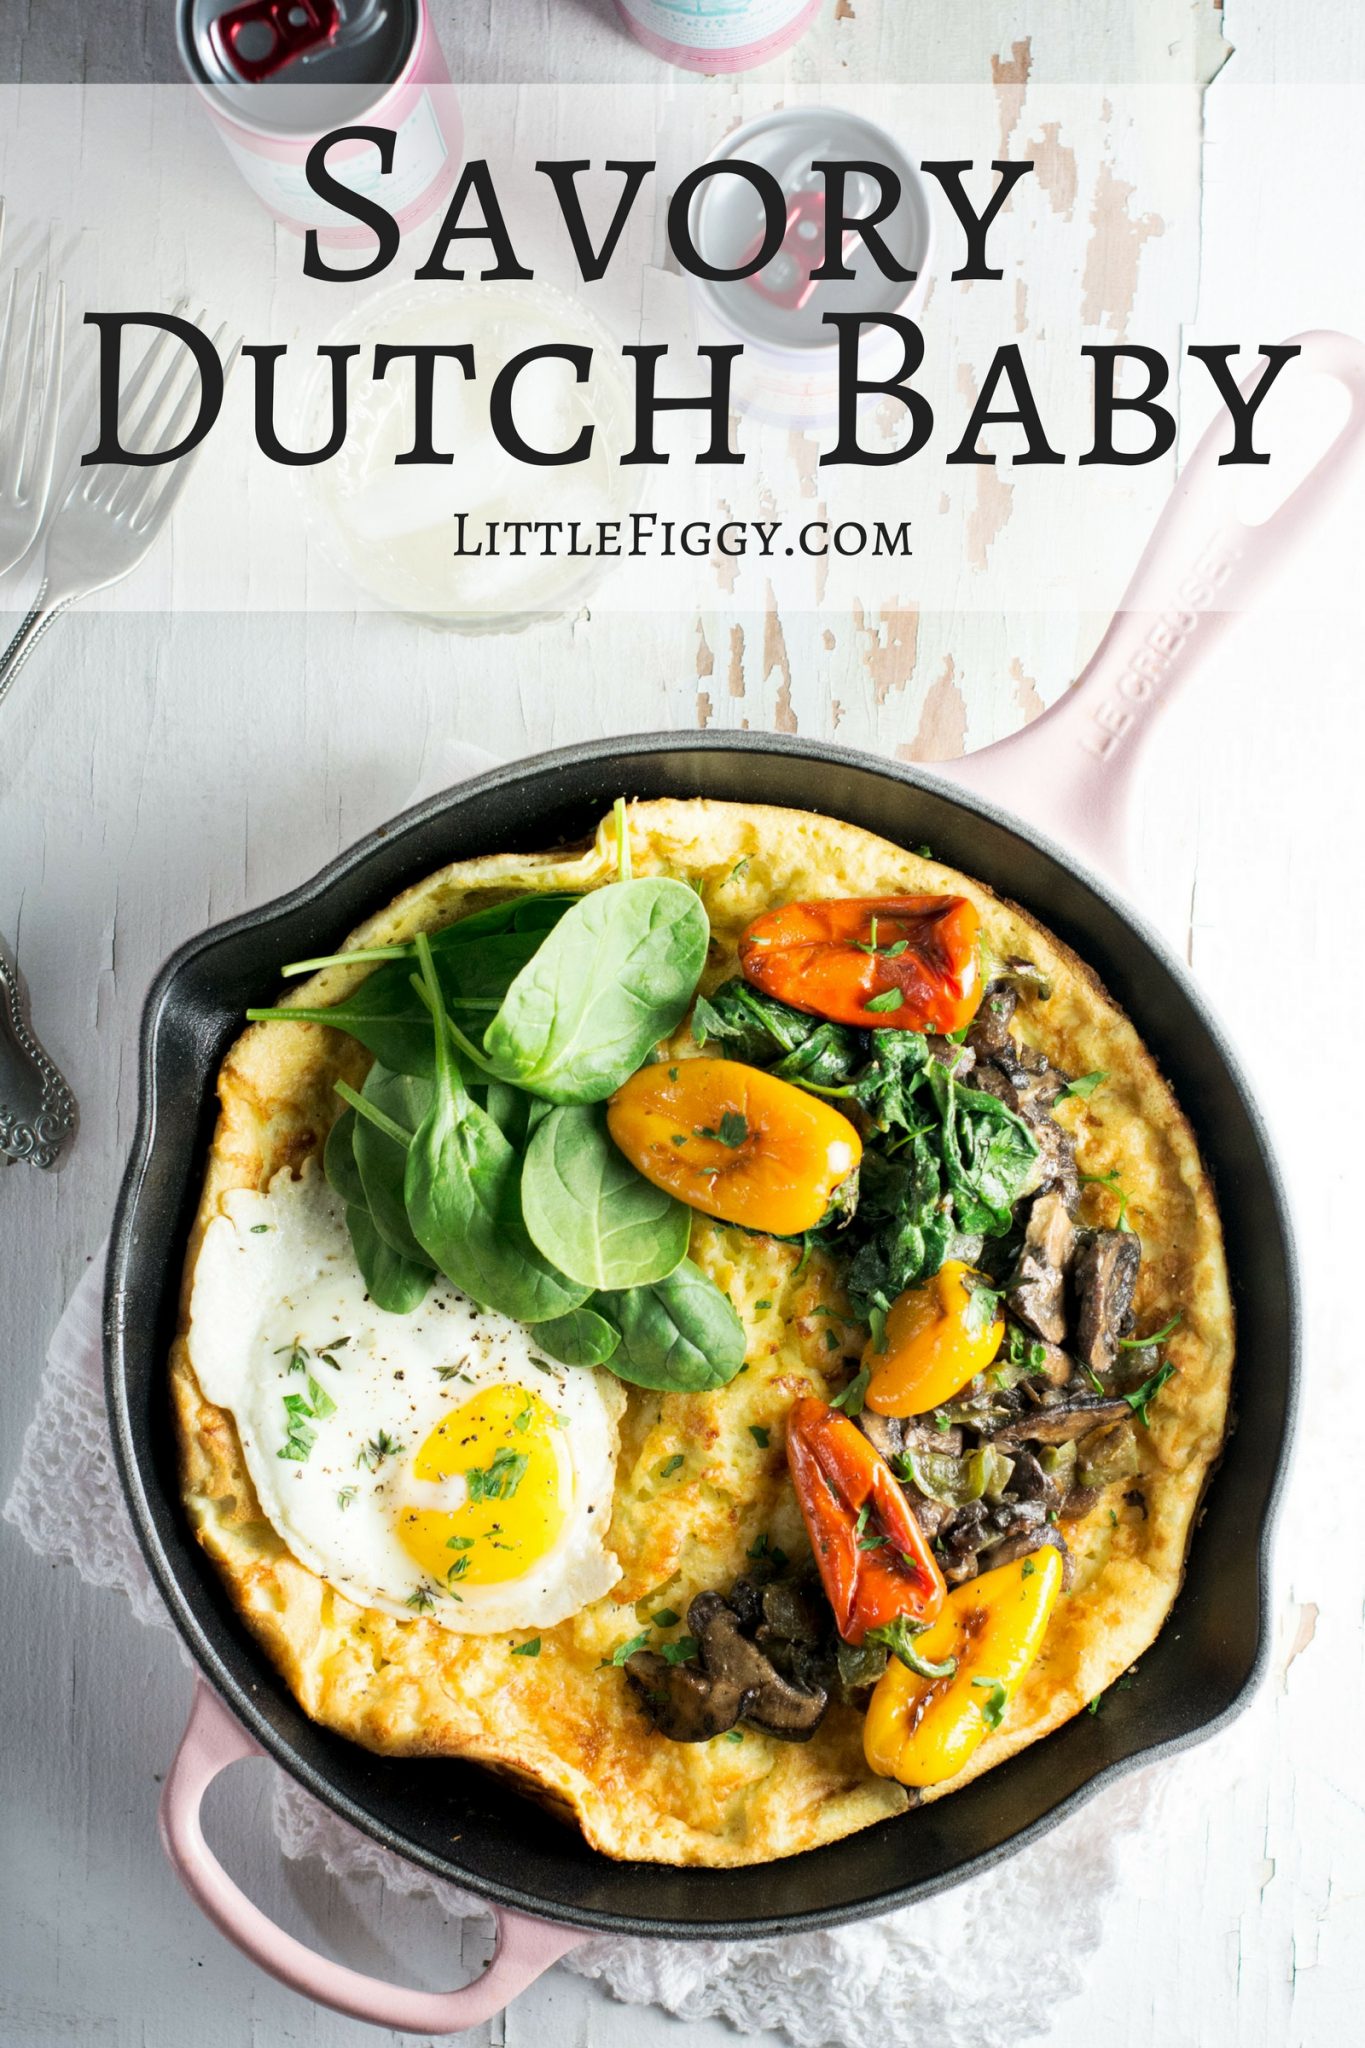 Savory Dutch Baby, perfect for an easy to make brunch, made in my favorite @LeCreuset skillet! Pair the dutch baby with @enjoyPampelonne! #ad ##LeCreusetLove #EnjoyPampelonne